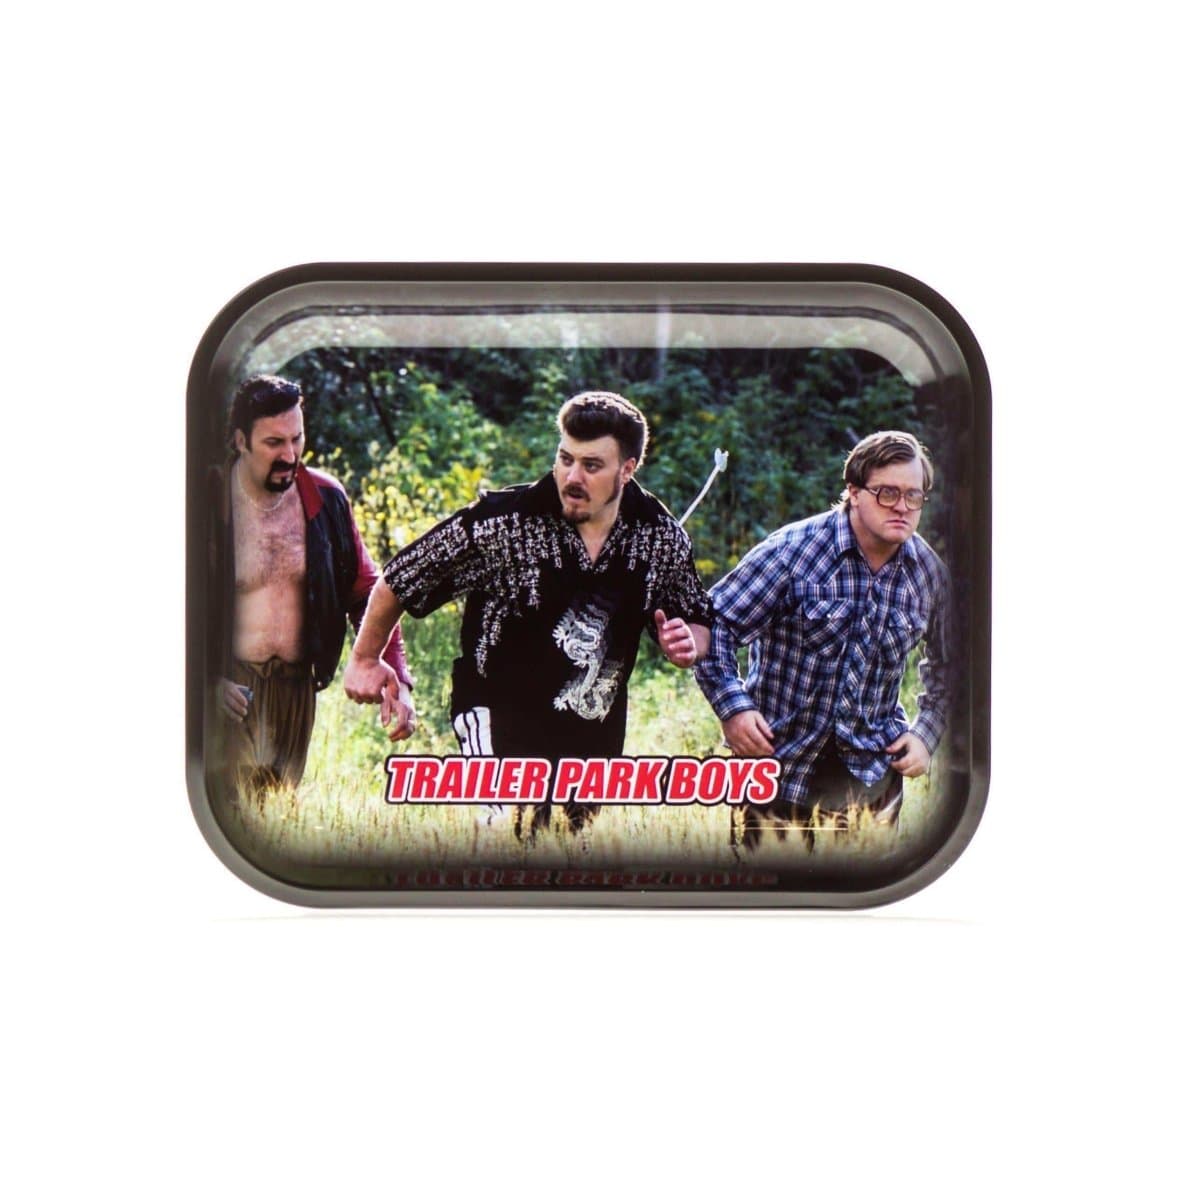 Trailer Park Boys Rolling Tray Large Hustle Rolling Tray